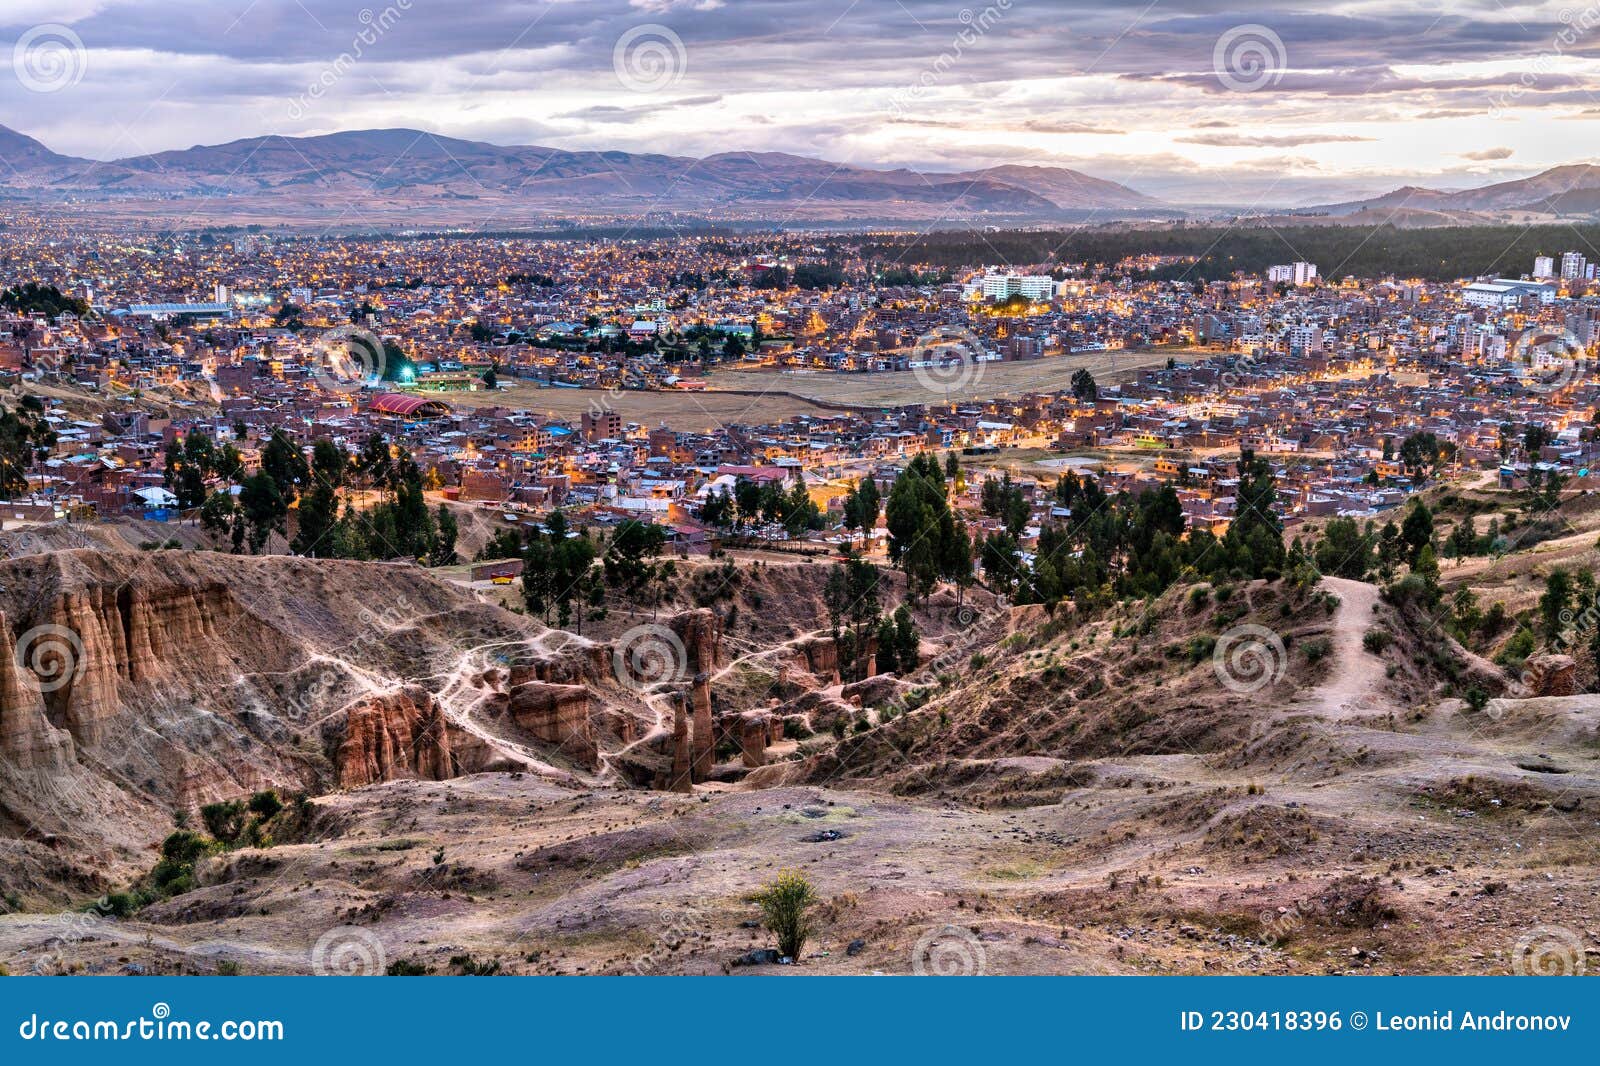 torre torre rock formations and skyline of huancayo in peru